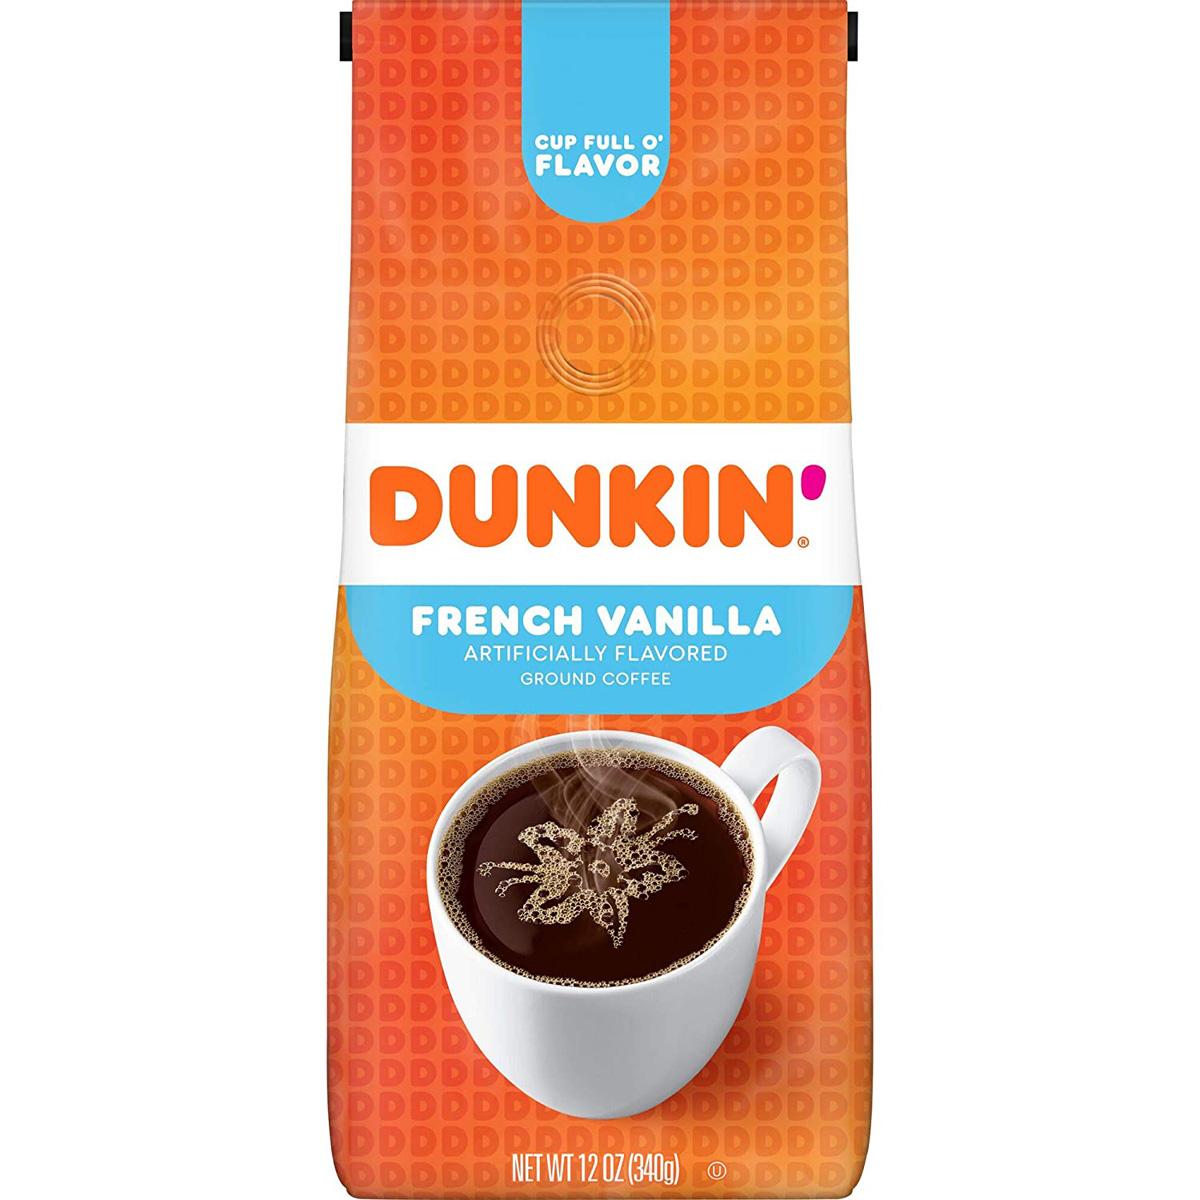 Dunkin French Vanilla Flavored Ground Coffee for $3.74 Shipped